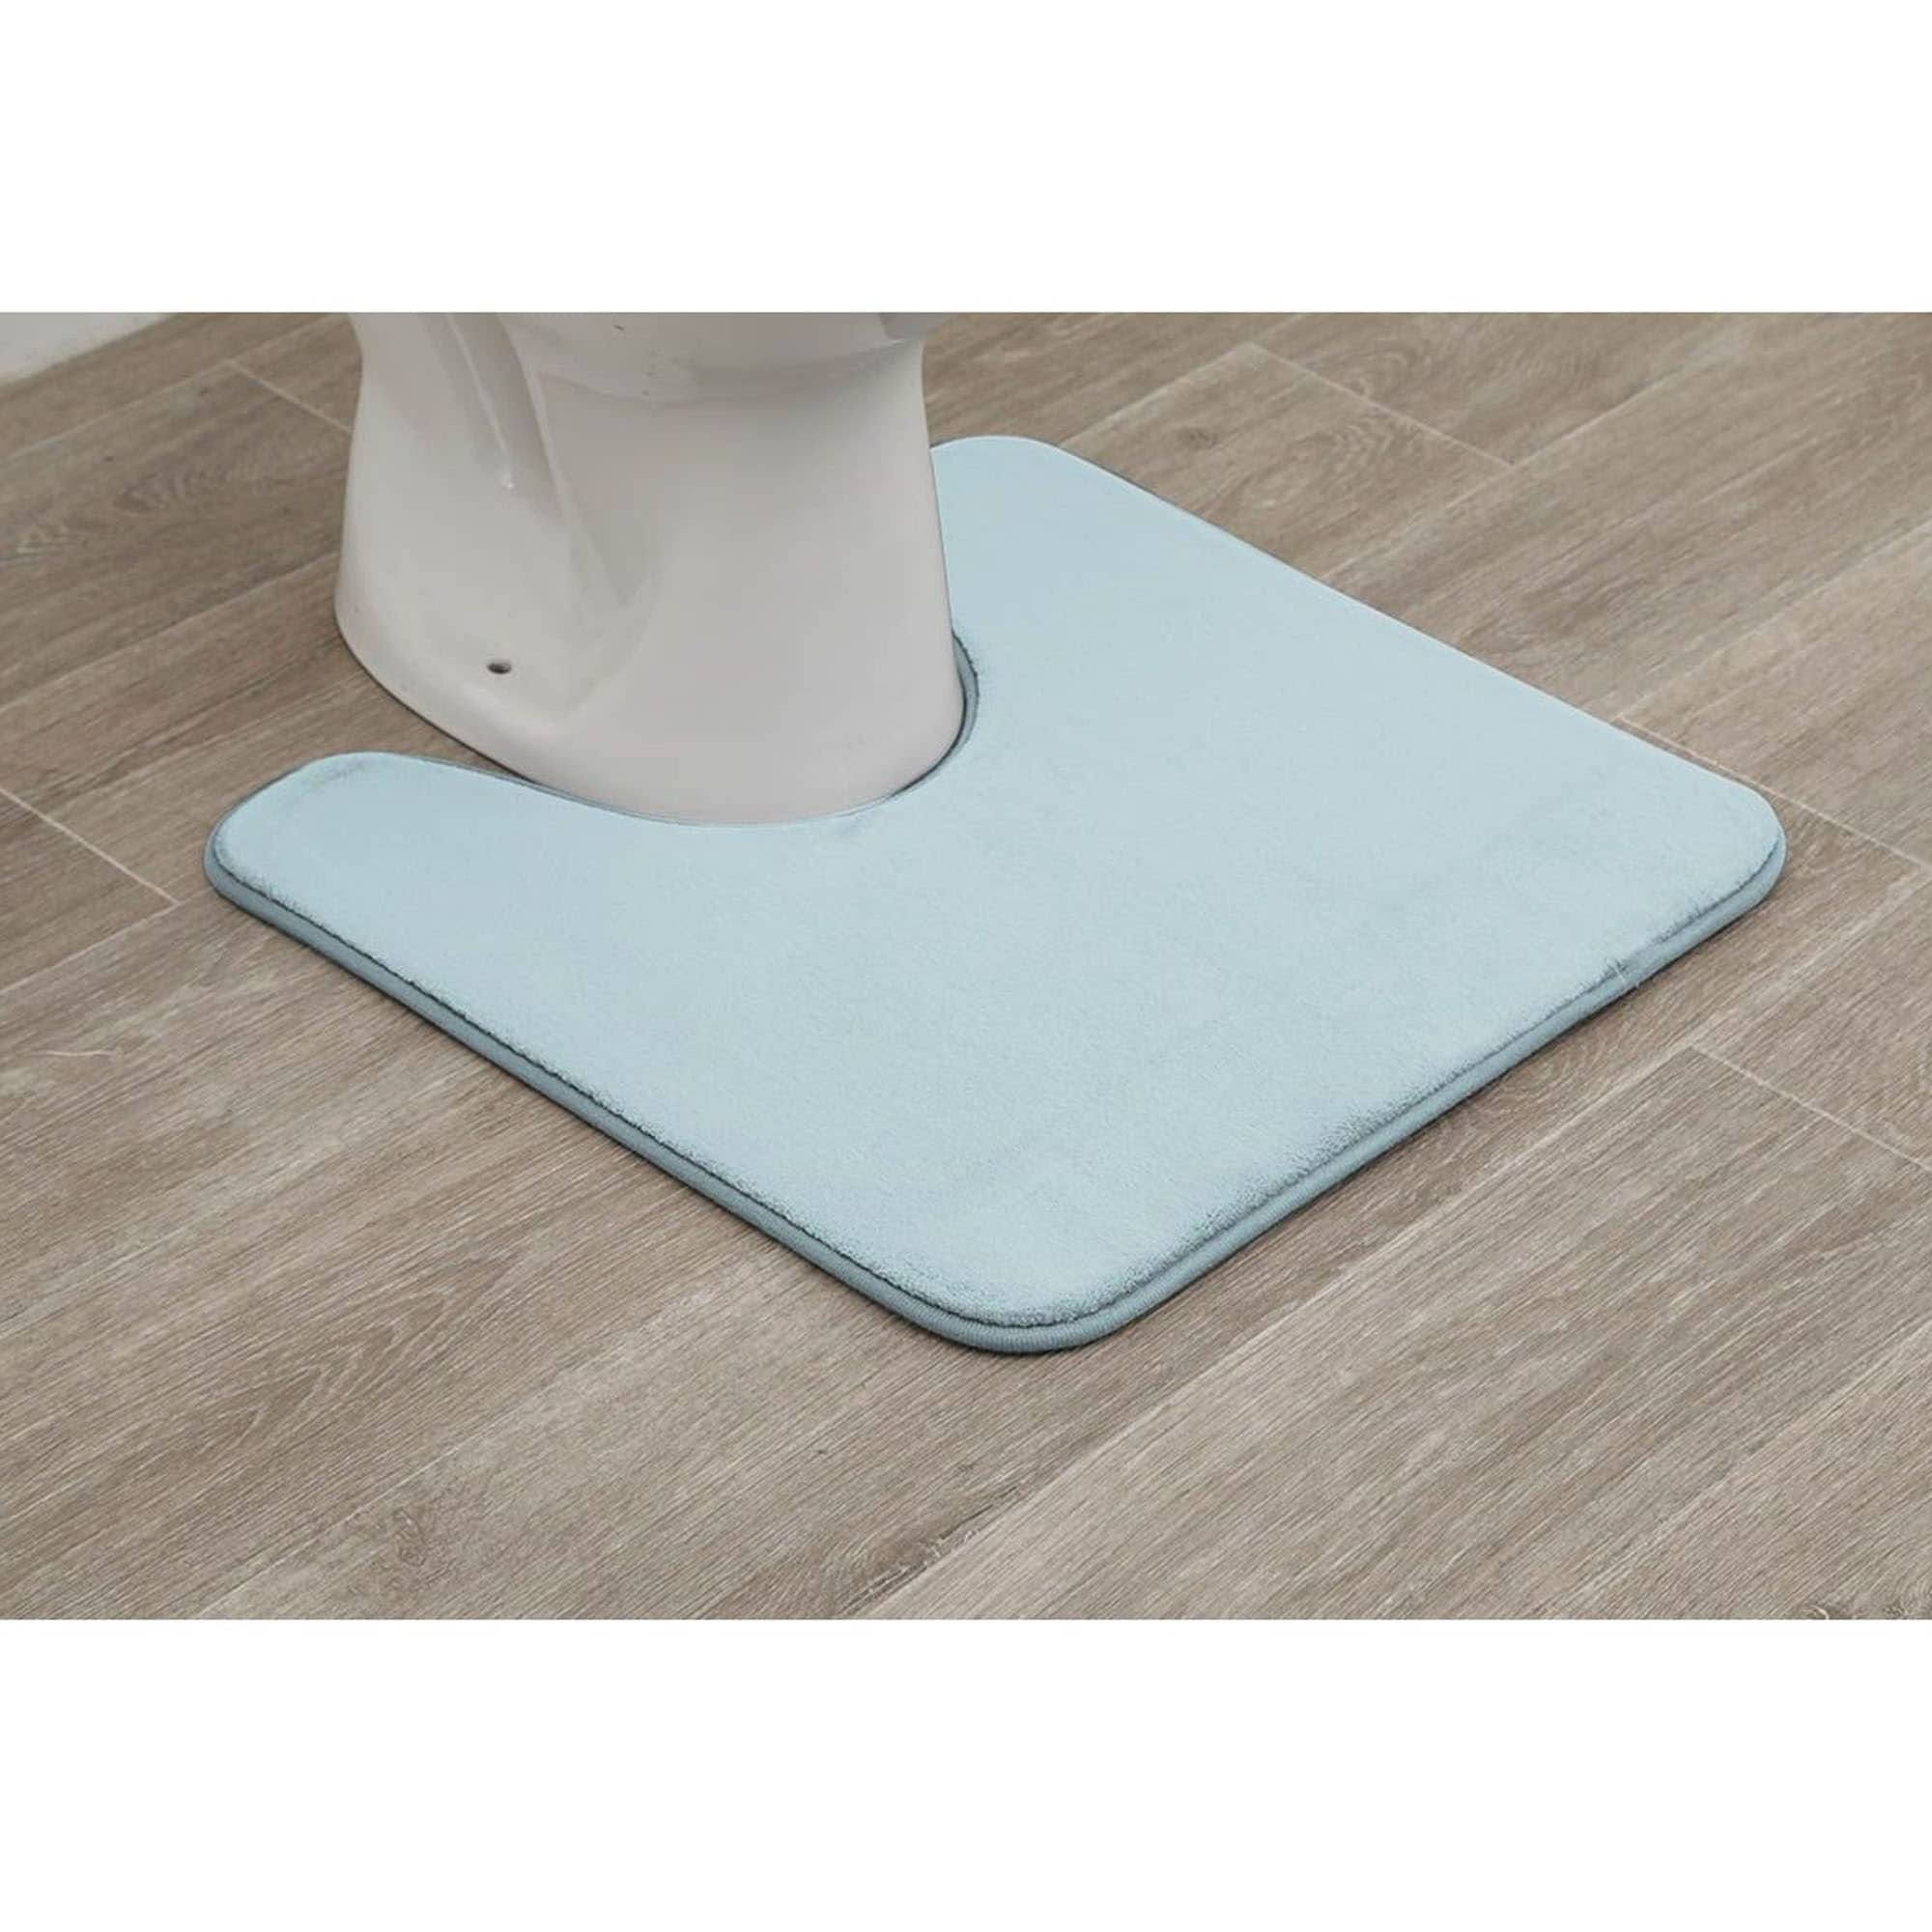 https://ak1.ostkcdn.com/images/products/is/images/direct/8a3c9e5c6179eb9f903644c040ee0ee19620aebe/Contour-Bath-Rug-Memory-Foam-Mat-White-20%22L-x-20%22W.jpg